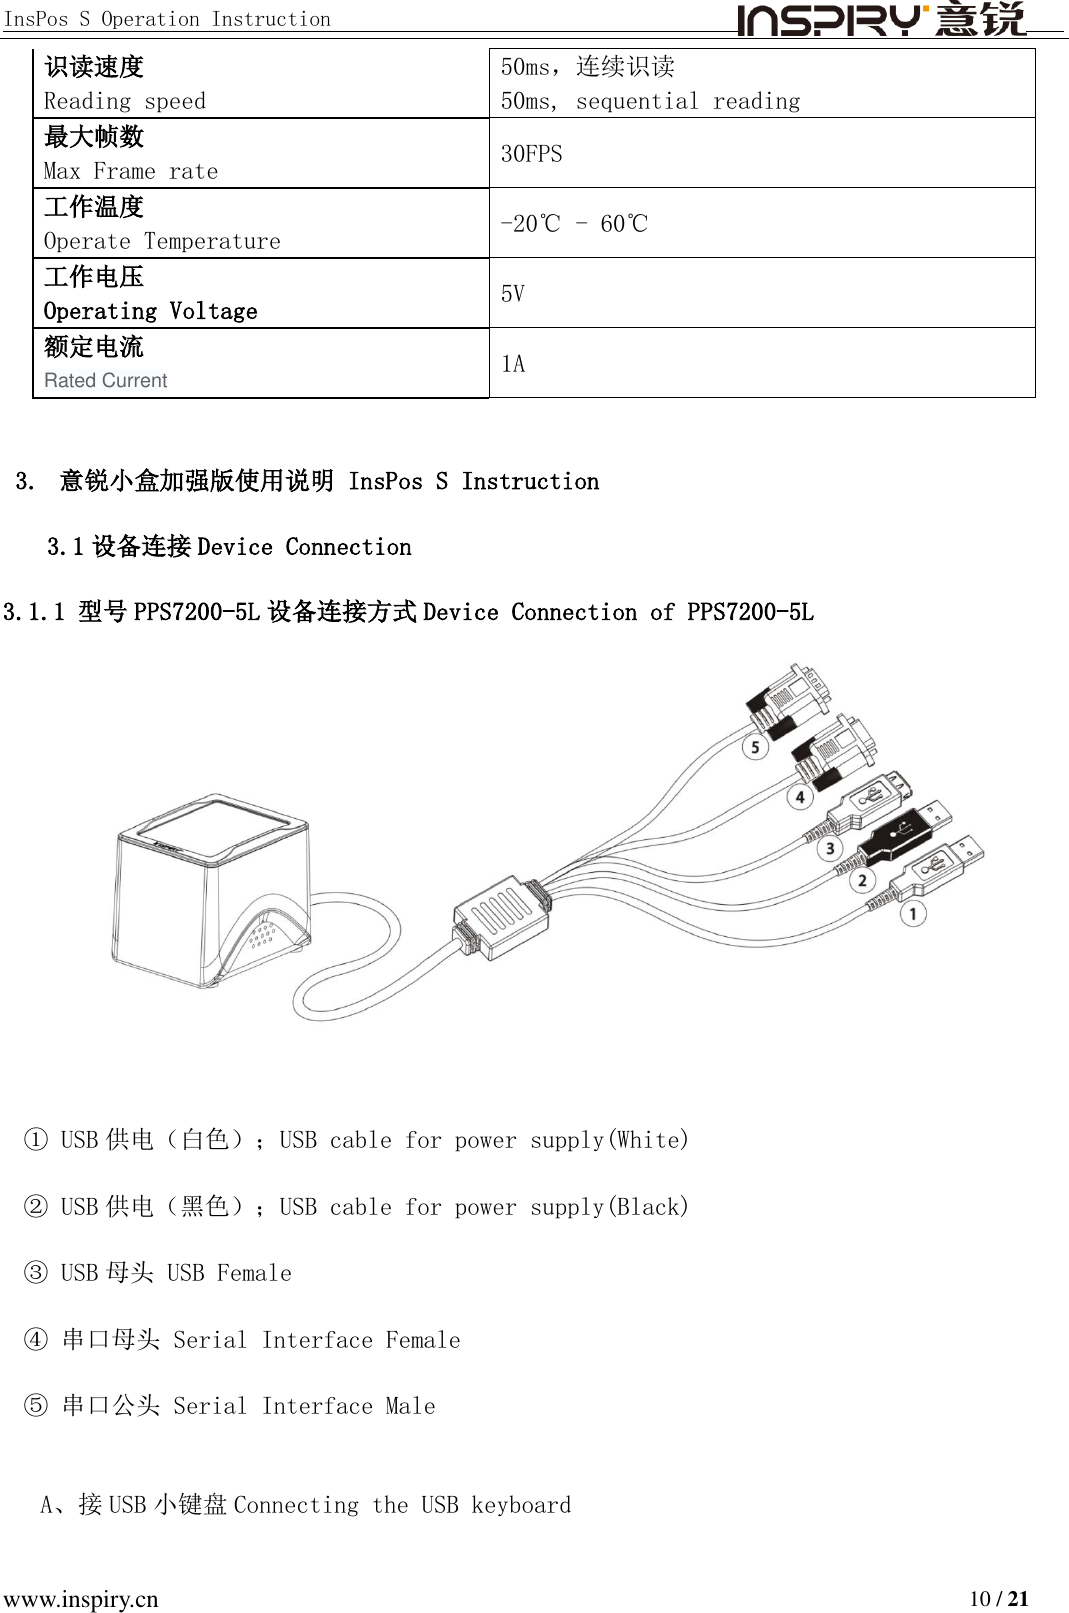 InsPos S Operation Instruction                                         www.inspiry.cn                                                                           10 / 21  3. 意锐小盒加强版使用说明 InsPos S Instruction 3.1 设备连接 Device Connection 3.1.1 型号 PPS7200-5L 设备连接方式 Device Connection of PPS7200-5L      ① USB 供电（白色）；USB cable for power supply(White) ② USB 供电（黑色）；USB cable for power supply(Black) ③ USB 母头 USB Female    ④ 串口母头 Serial Interface Female         ⑤ 串口公头 Serial Interface Male  A、接 USB 小键盘 Connecting the USB keyboard 识读速度 Reading speed 50ms，连续识读 50ms, sequential reading 最大帧数 Max Frame rate 30FPS 工作温度 Operate Temperature -20℃ - 60℃ 工作电压 Operating Voltage 5V 额定电流 Rated Current 1A 